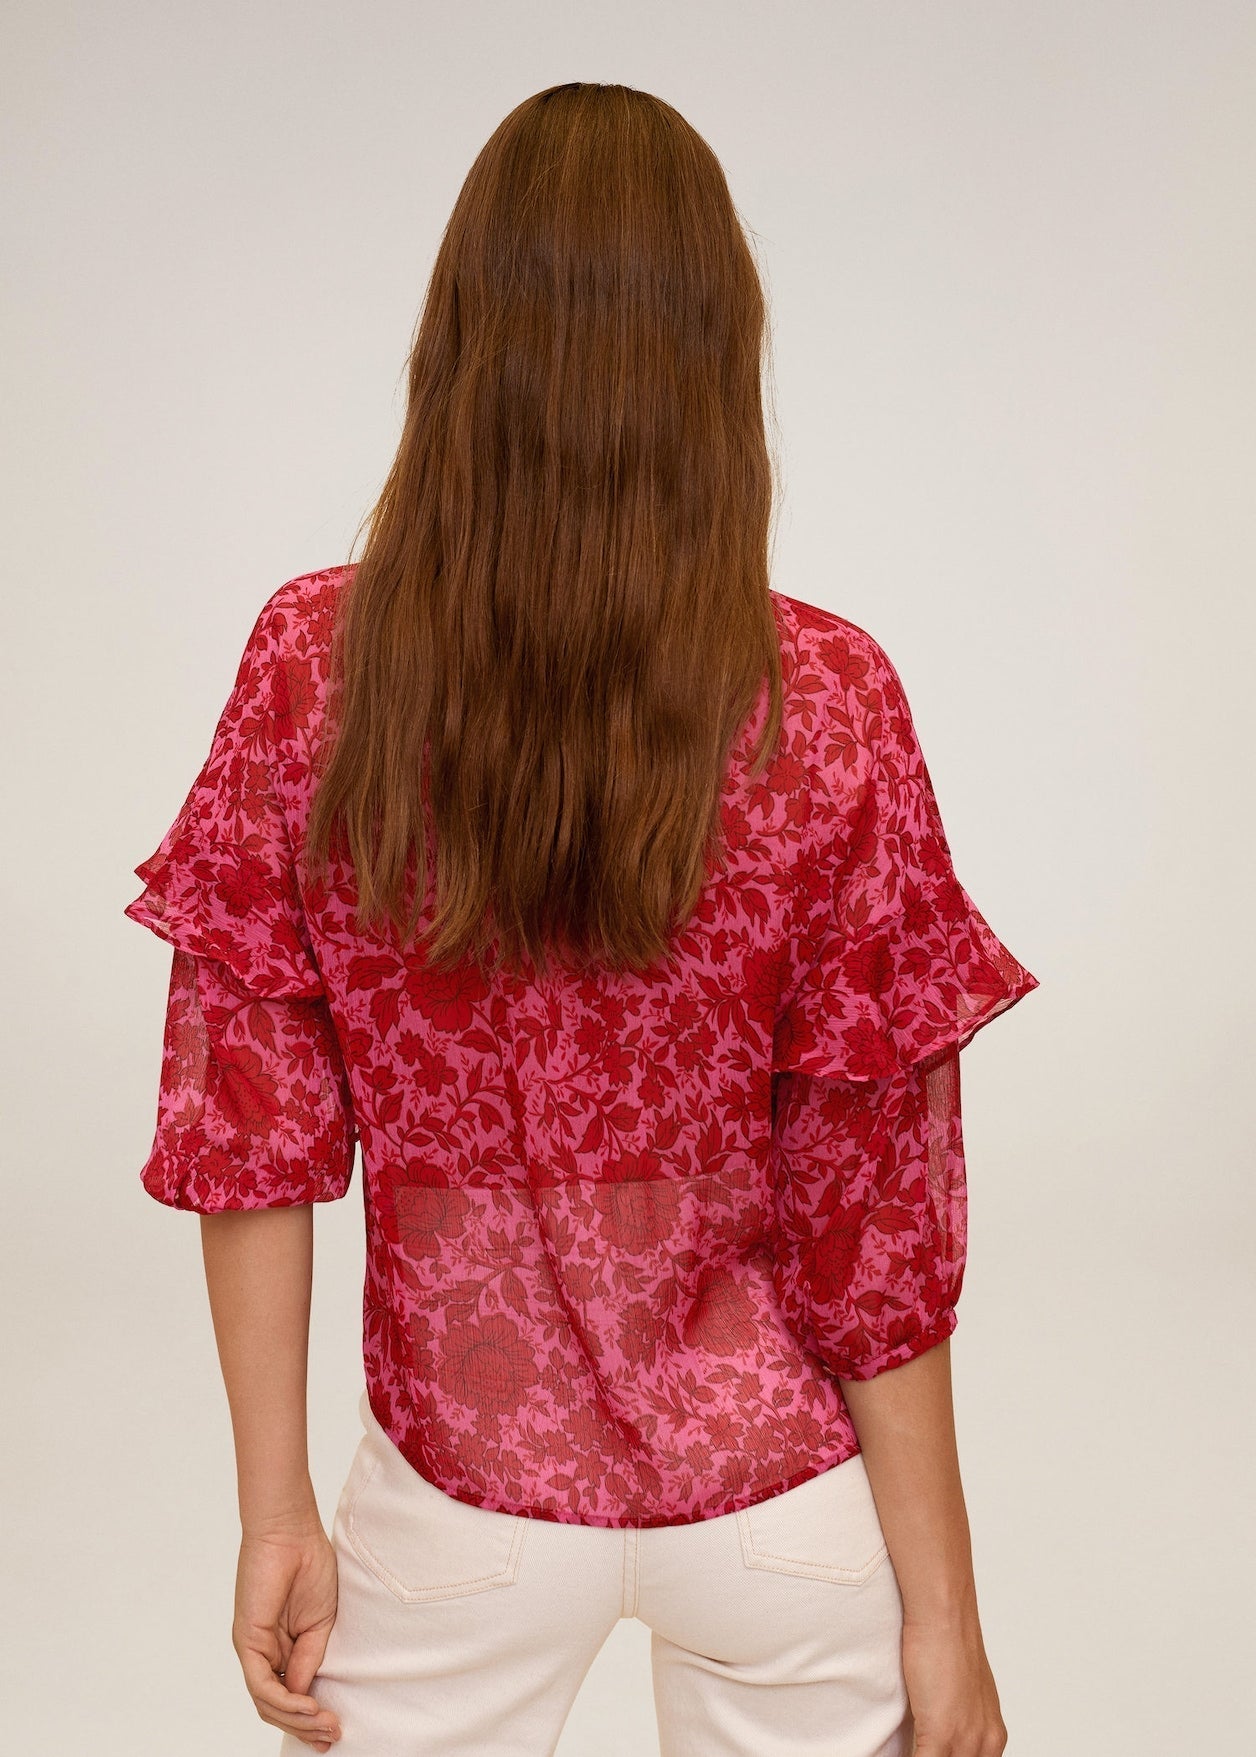 Floral Print Blouse from Blouses collection you can buy now from Fashion And Icon online shop